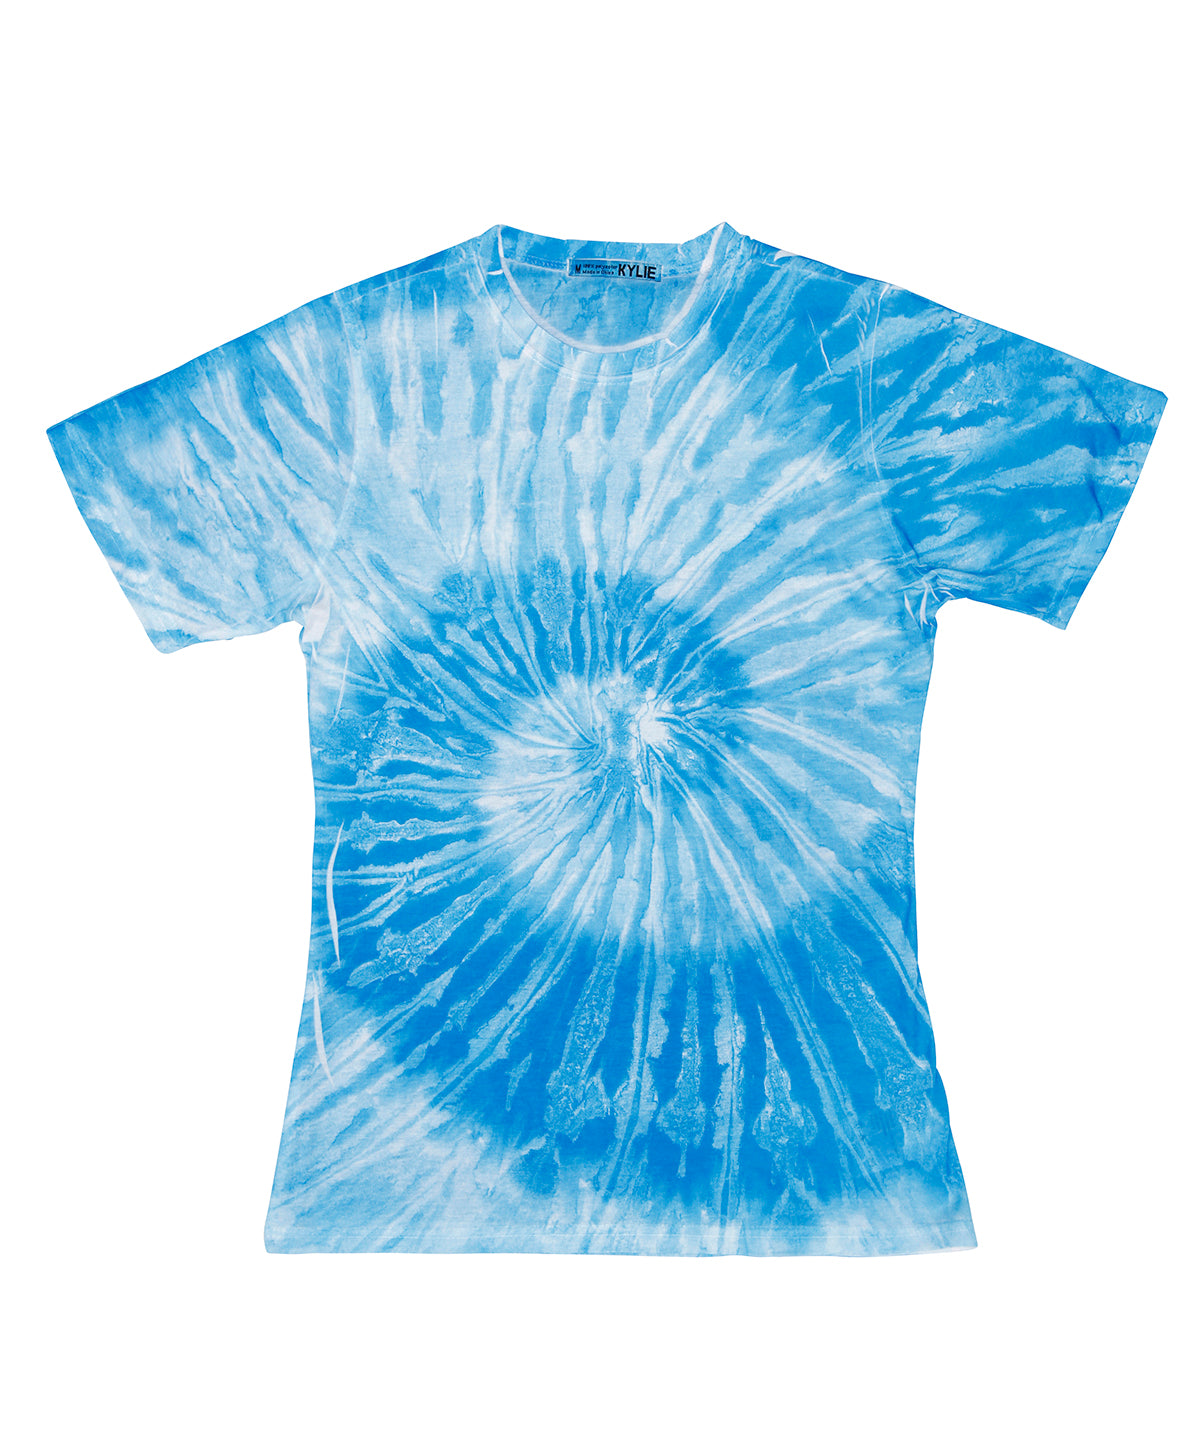 Personalised T-Shirts - Tie-Dye Colortone Women's sublimated spider T